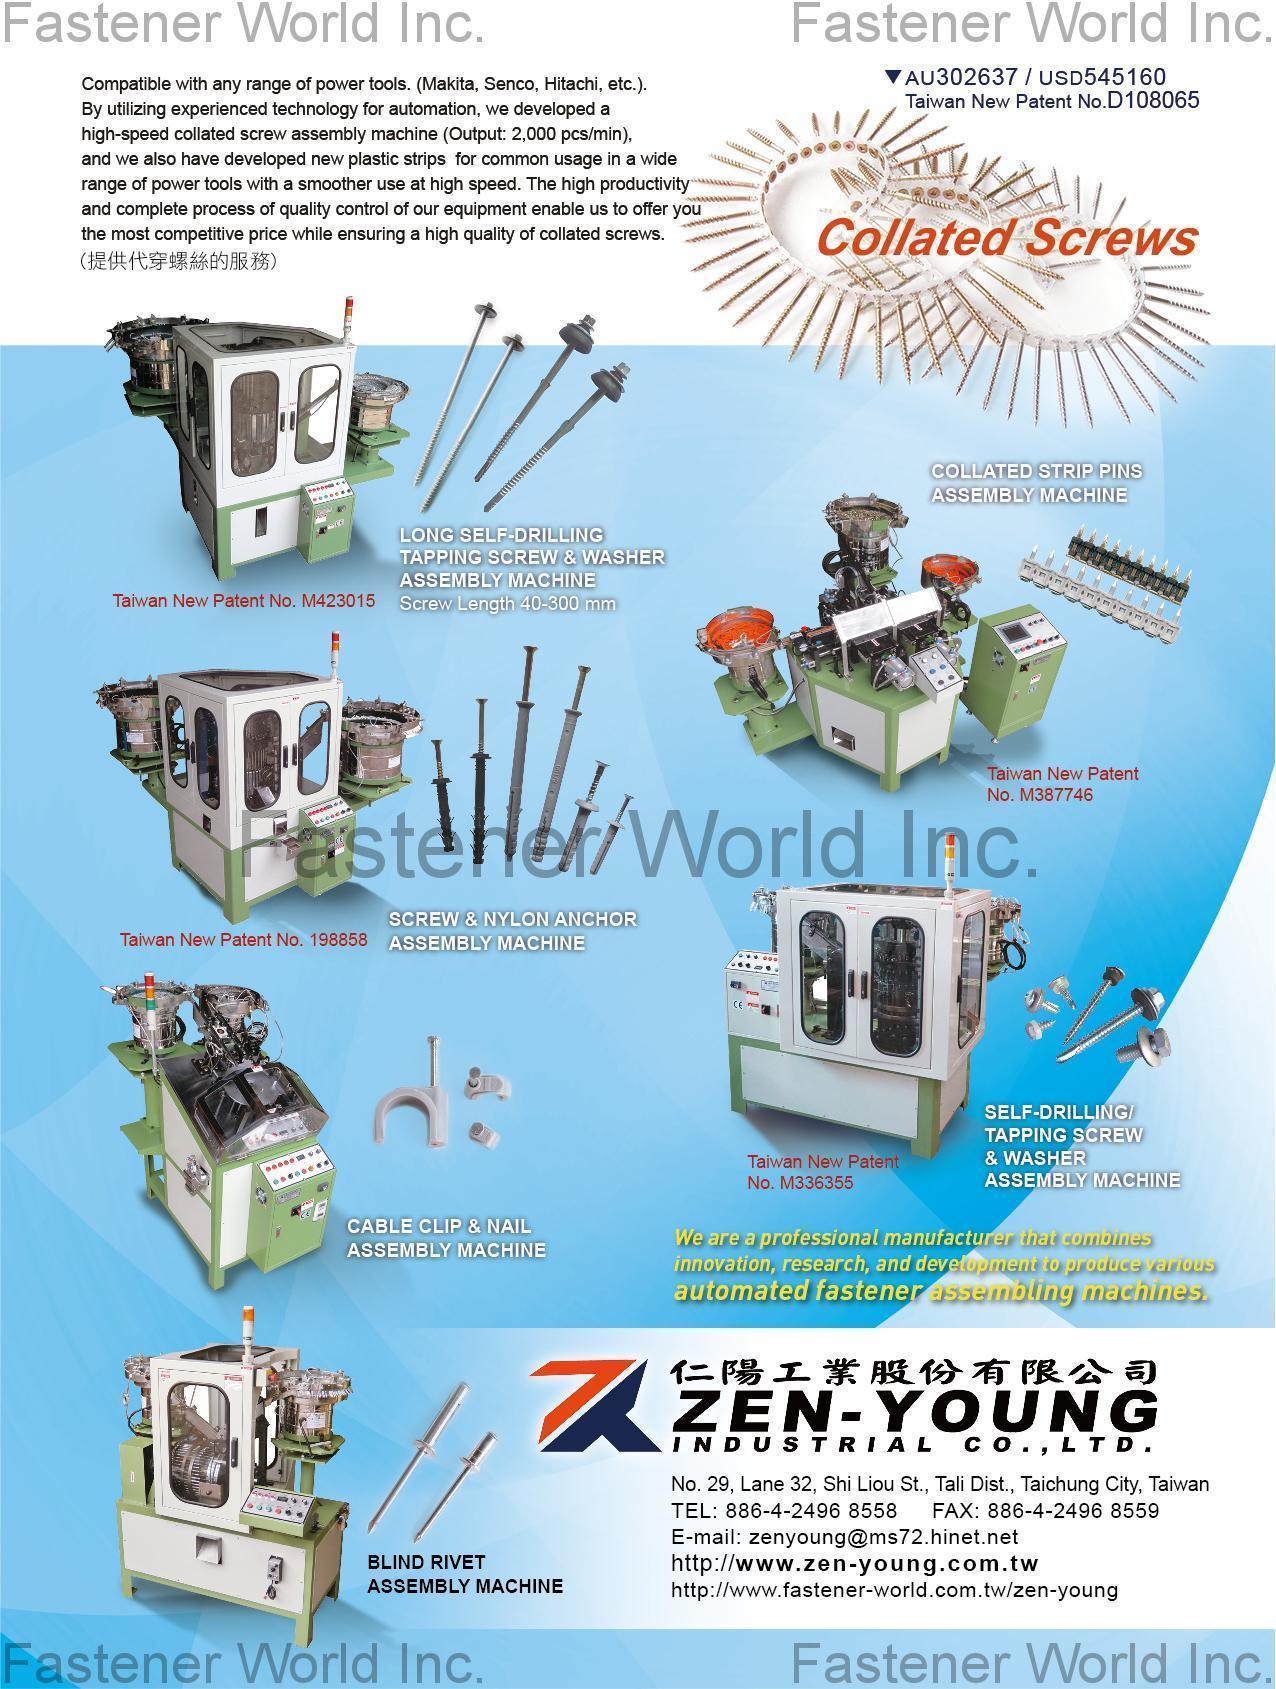 ZEN-YOUNG INDUSTRIAL CO., LTD.  , Long Self-Drilling Tapping Screw & Washer Assembly Machine,Collated Strip Pins Assembly Machine,Screw & Nylon Anchor Assembly Machine,Cable Clip & Nail Assembly Machine,Self-Drilling/Tapping Screw & Washer Assembly Machine,Blind Rivet Assembly Machine , Long Self - Drilling / Tapping Screw & Washer Assembly Machine